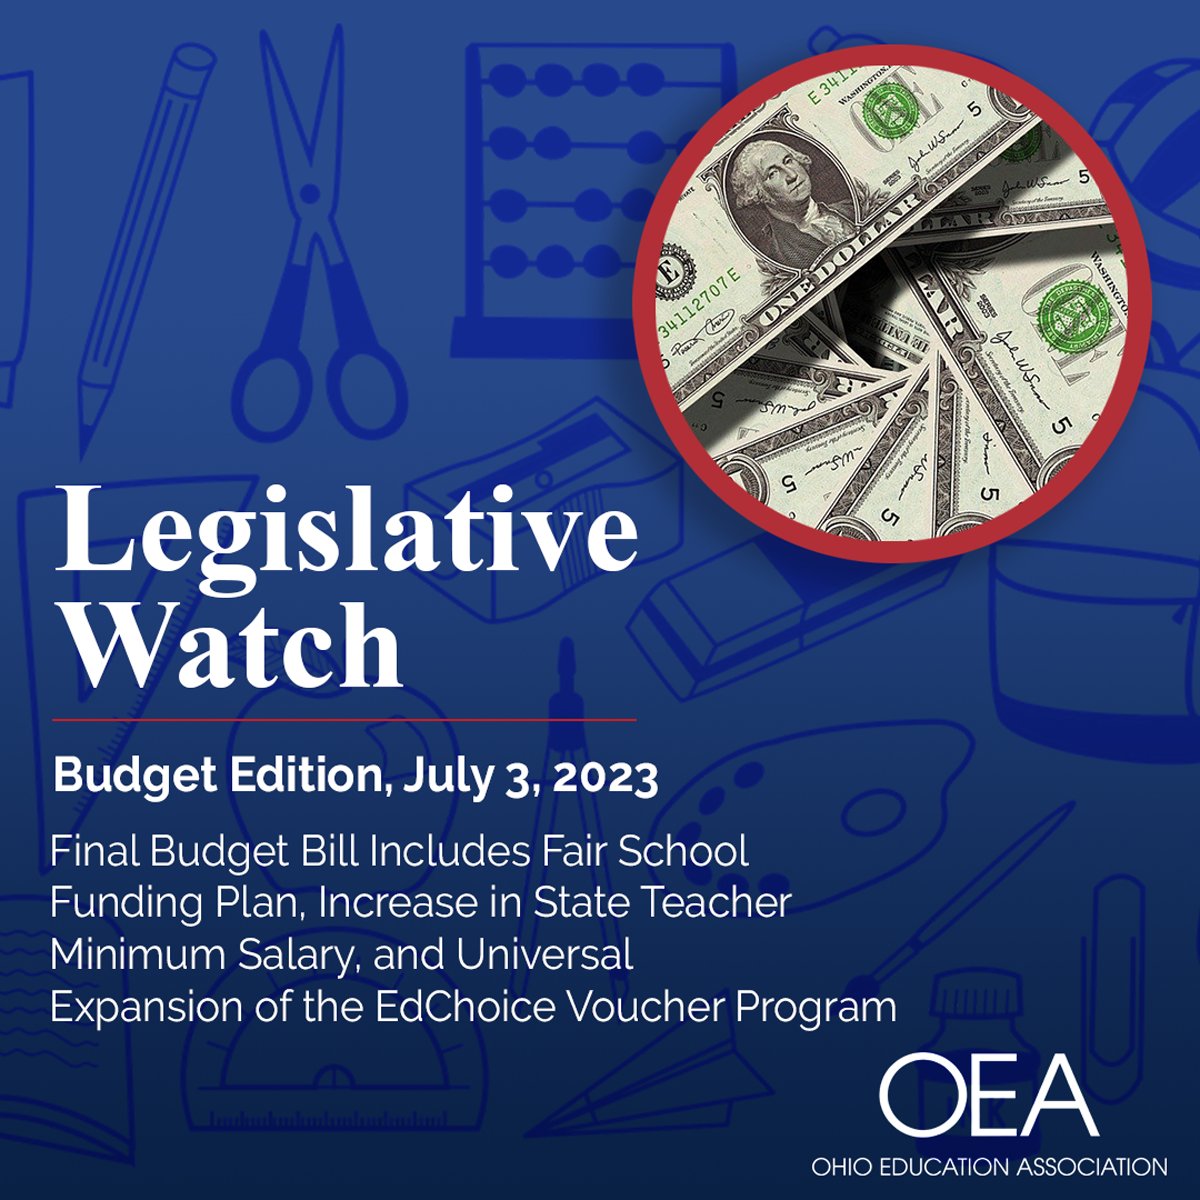 The newest OEA #legislativewatch is out! 👀 #housebill33 
🖇️ Final Budget Bill Includes #FairSchoolFundingPlan, Increase in State Teacher Minimum Salary 💲, and Universal Expansion of the EdChoice Voucher Program

For the #publiceducation priority issues👇
ohea.org/legislative-wa…